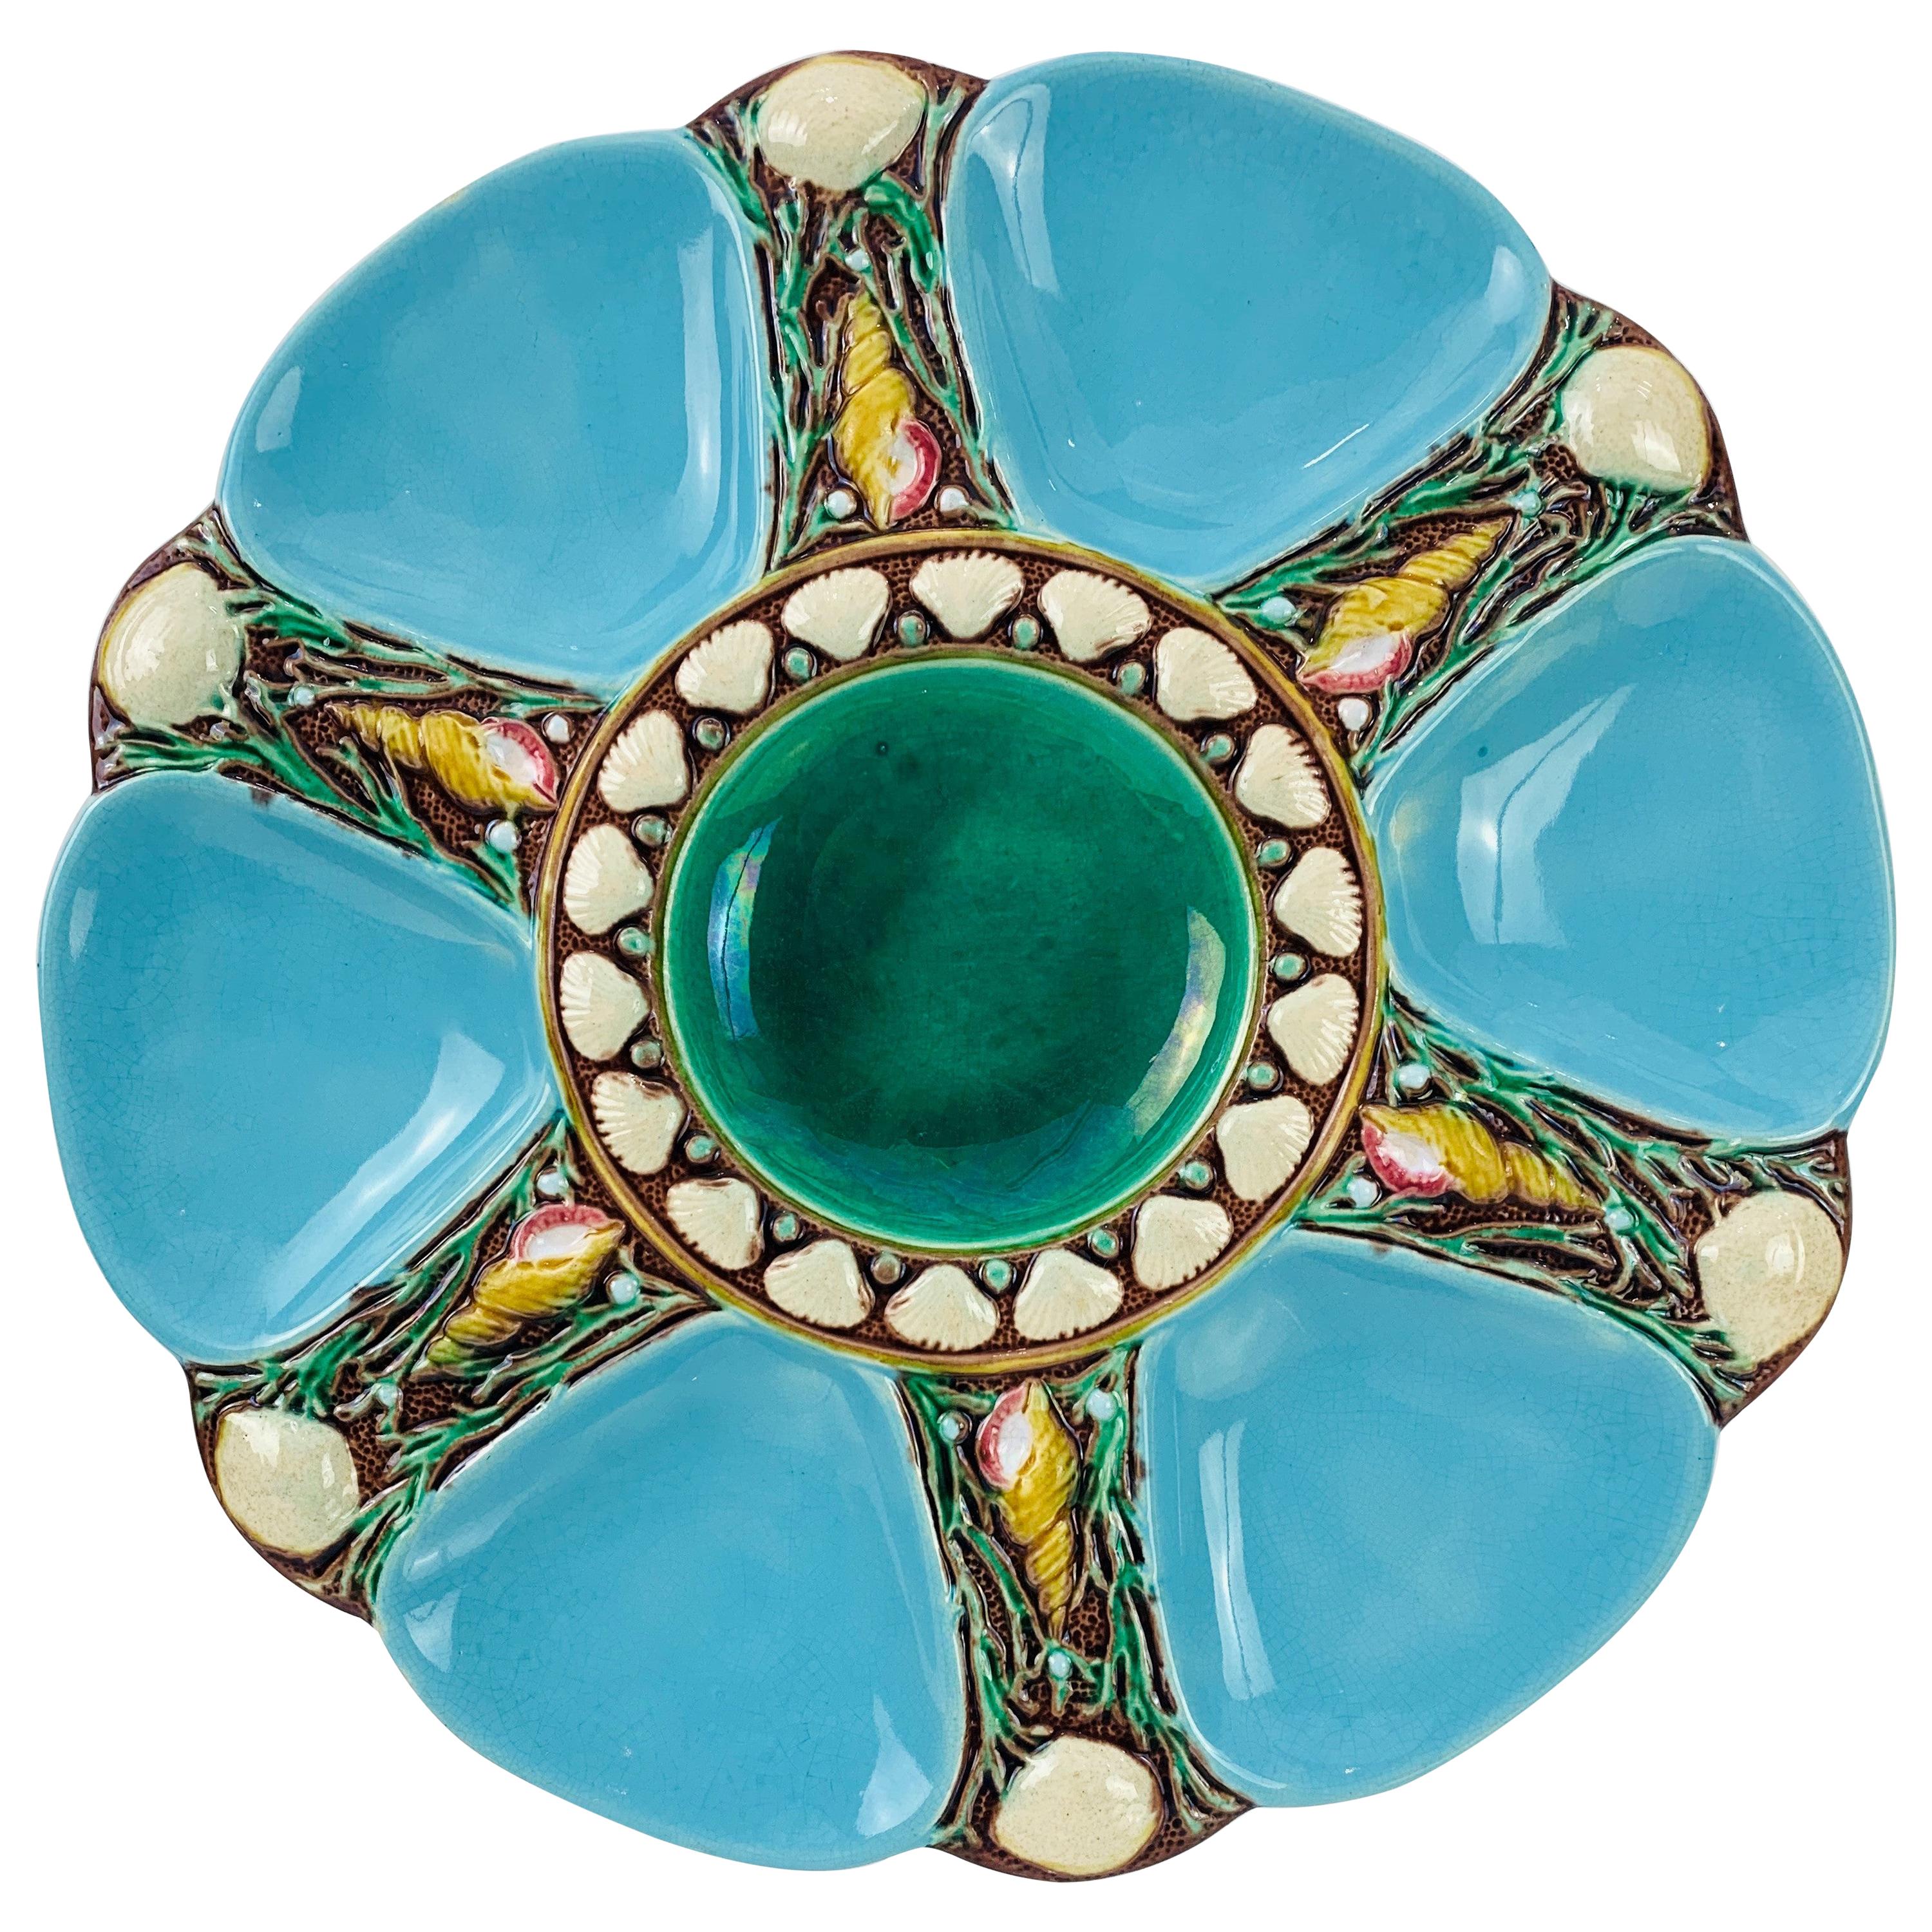 Minton Majolica Turquoise Six Well Oyster Plate, English, Dated 1873